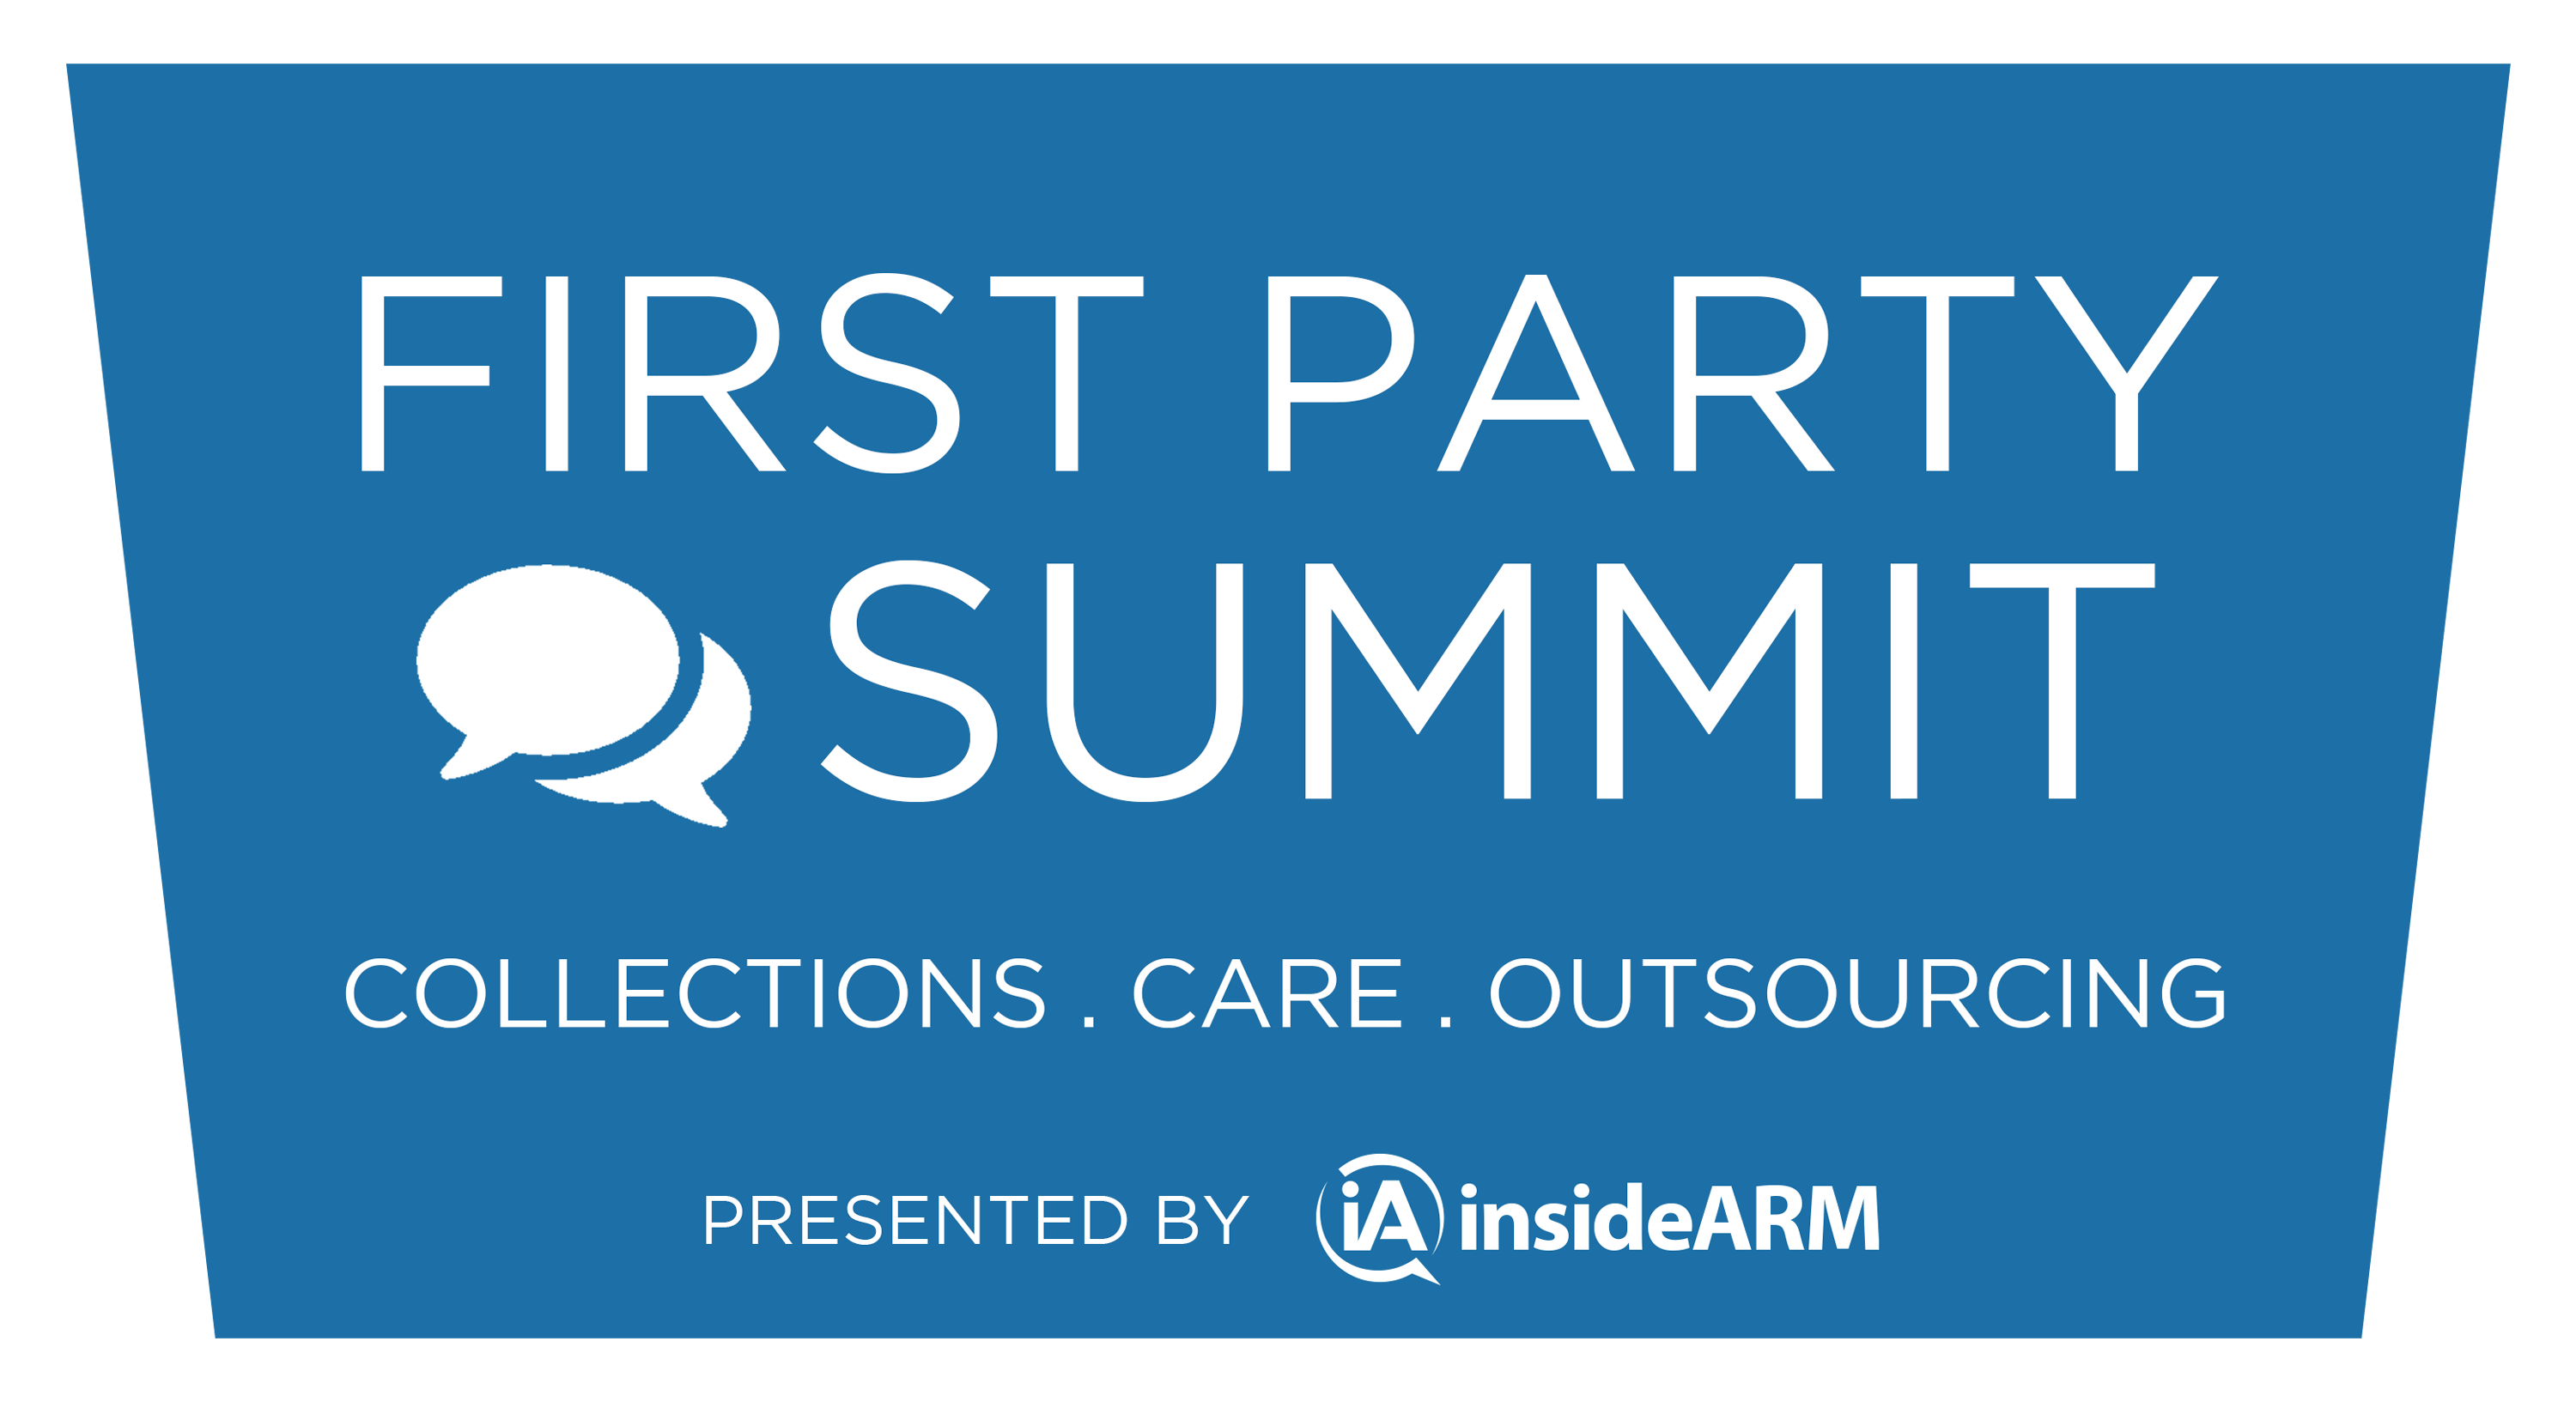 First Party Summit Logo